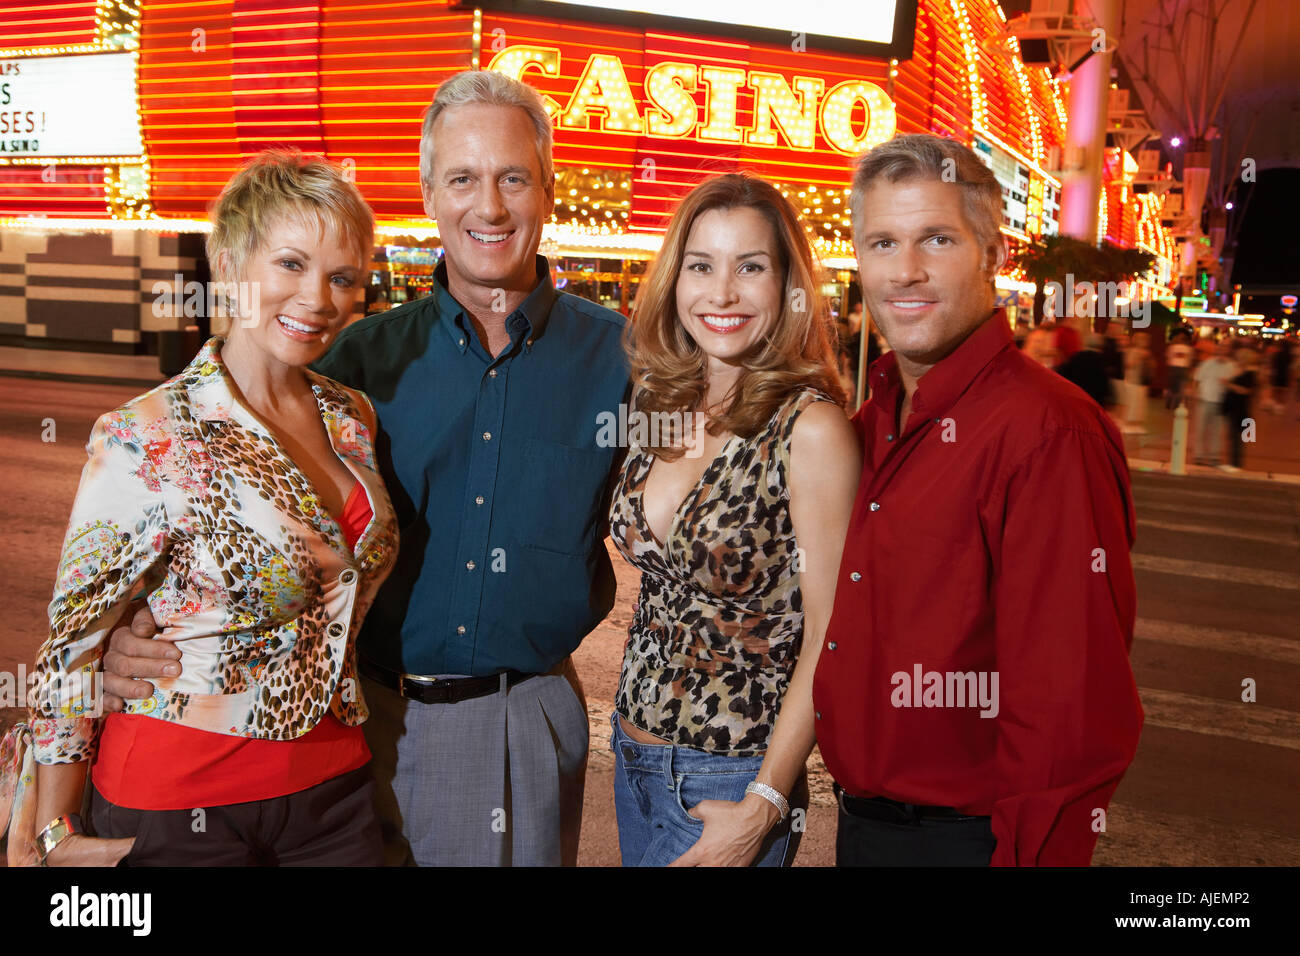 Two couples standing in front of illuminated casino, portrait Stock Photo